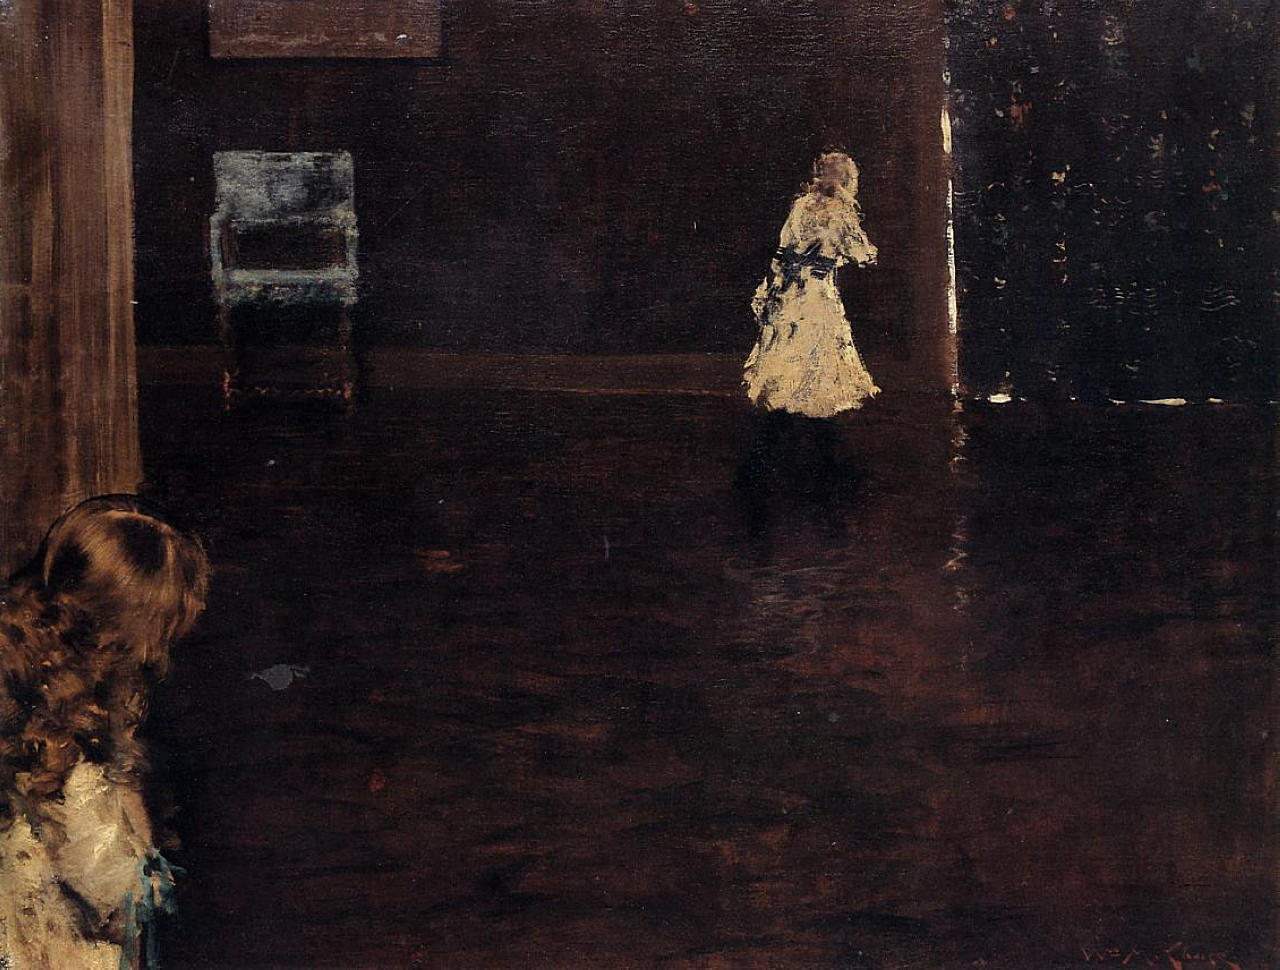 Hide and Seek, by William Merritt Chase, (1888), courtesy of Wikipaintings